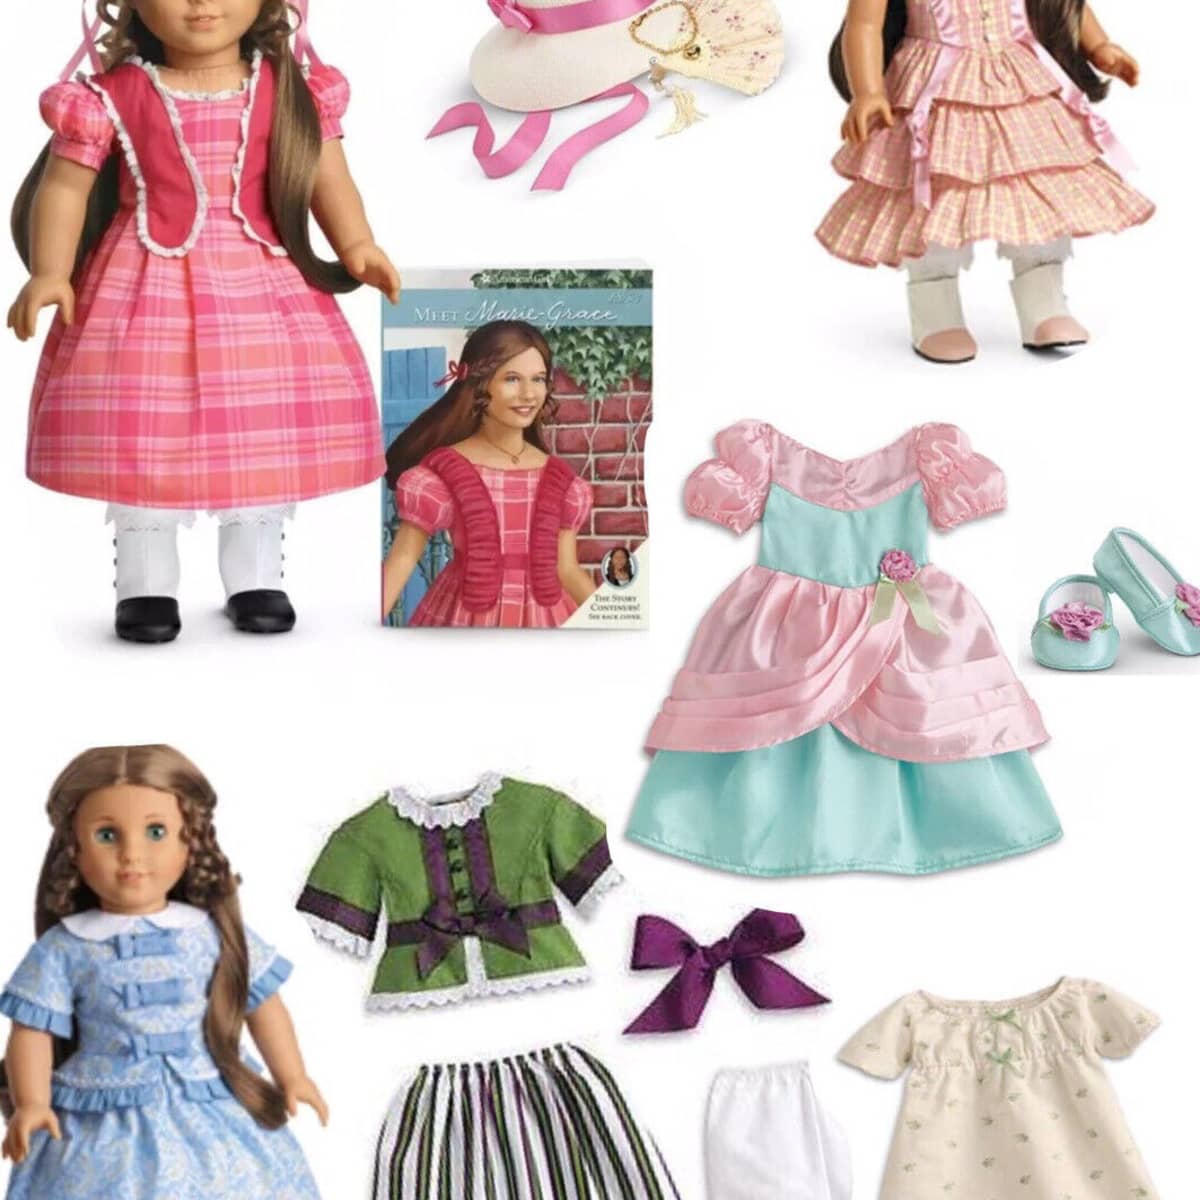 Marie-Grace's Clothing and Accessories (An American Girl